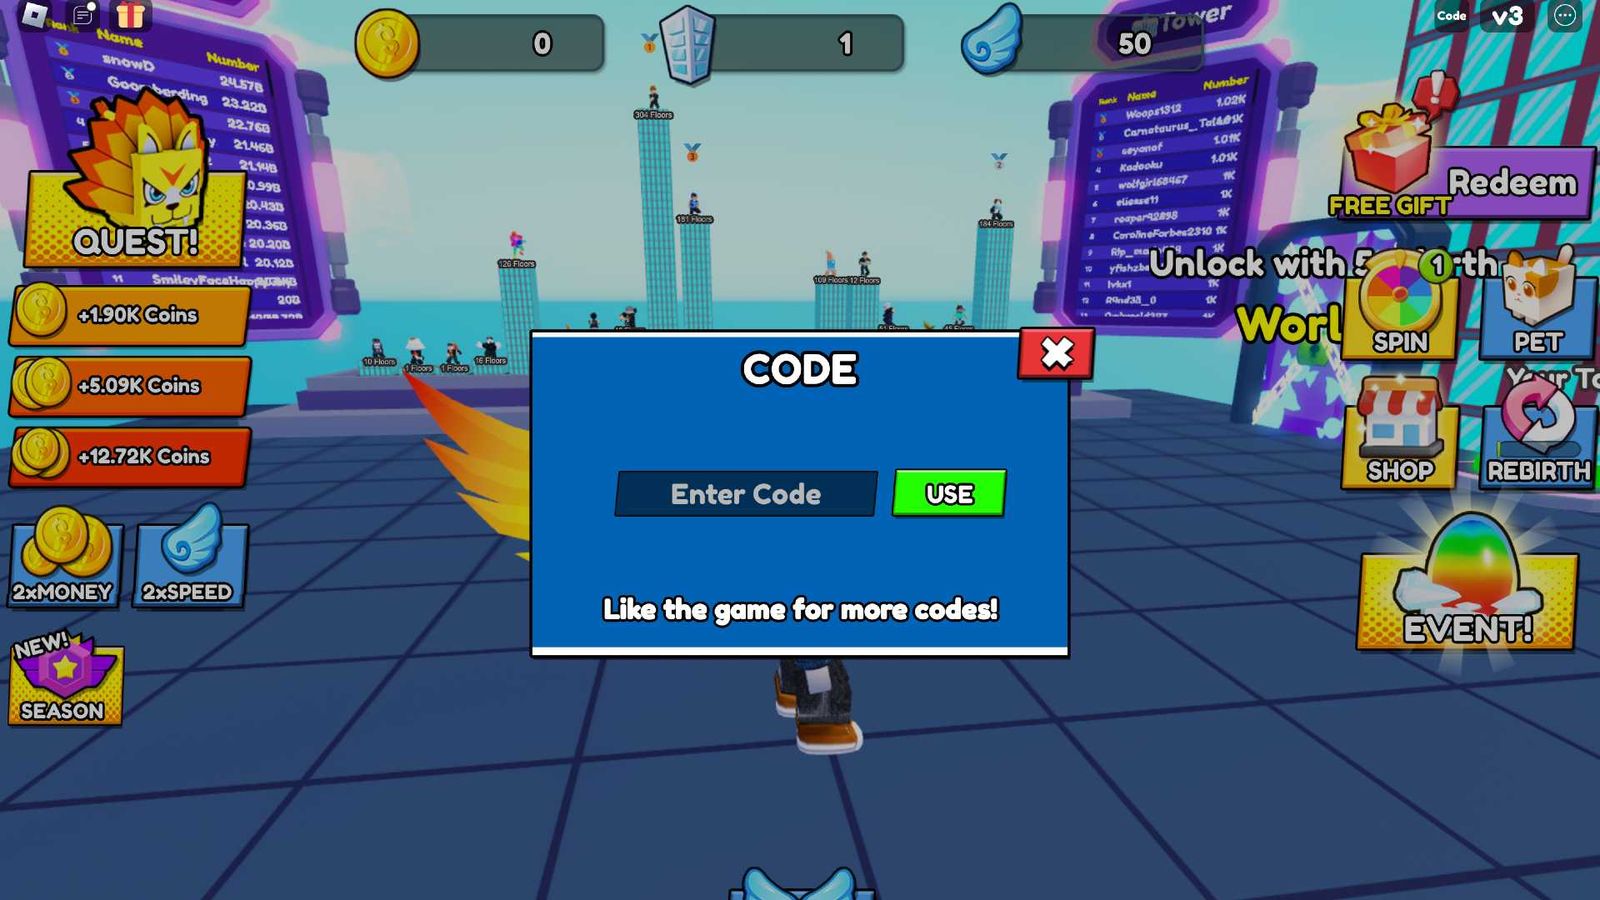 The code redemption screen in Building Towers to Fly Farther.